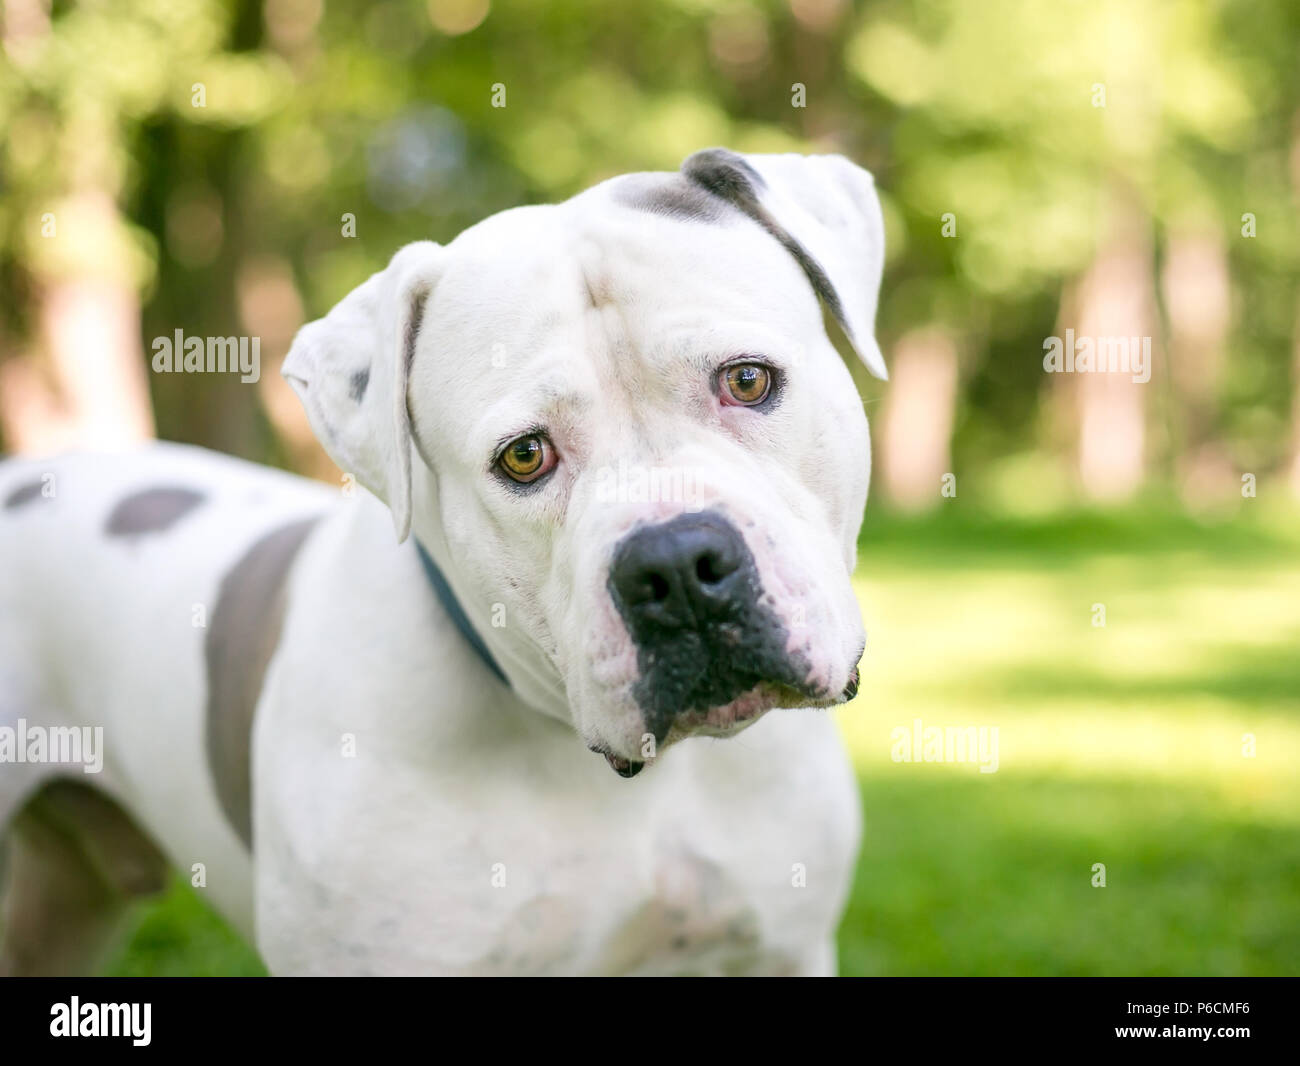 A white American Bulldog mixed breed dog with brown spots, listening with a head tilt Stock Photo